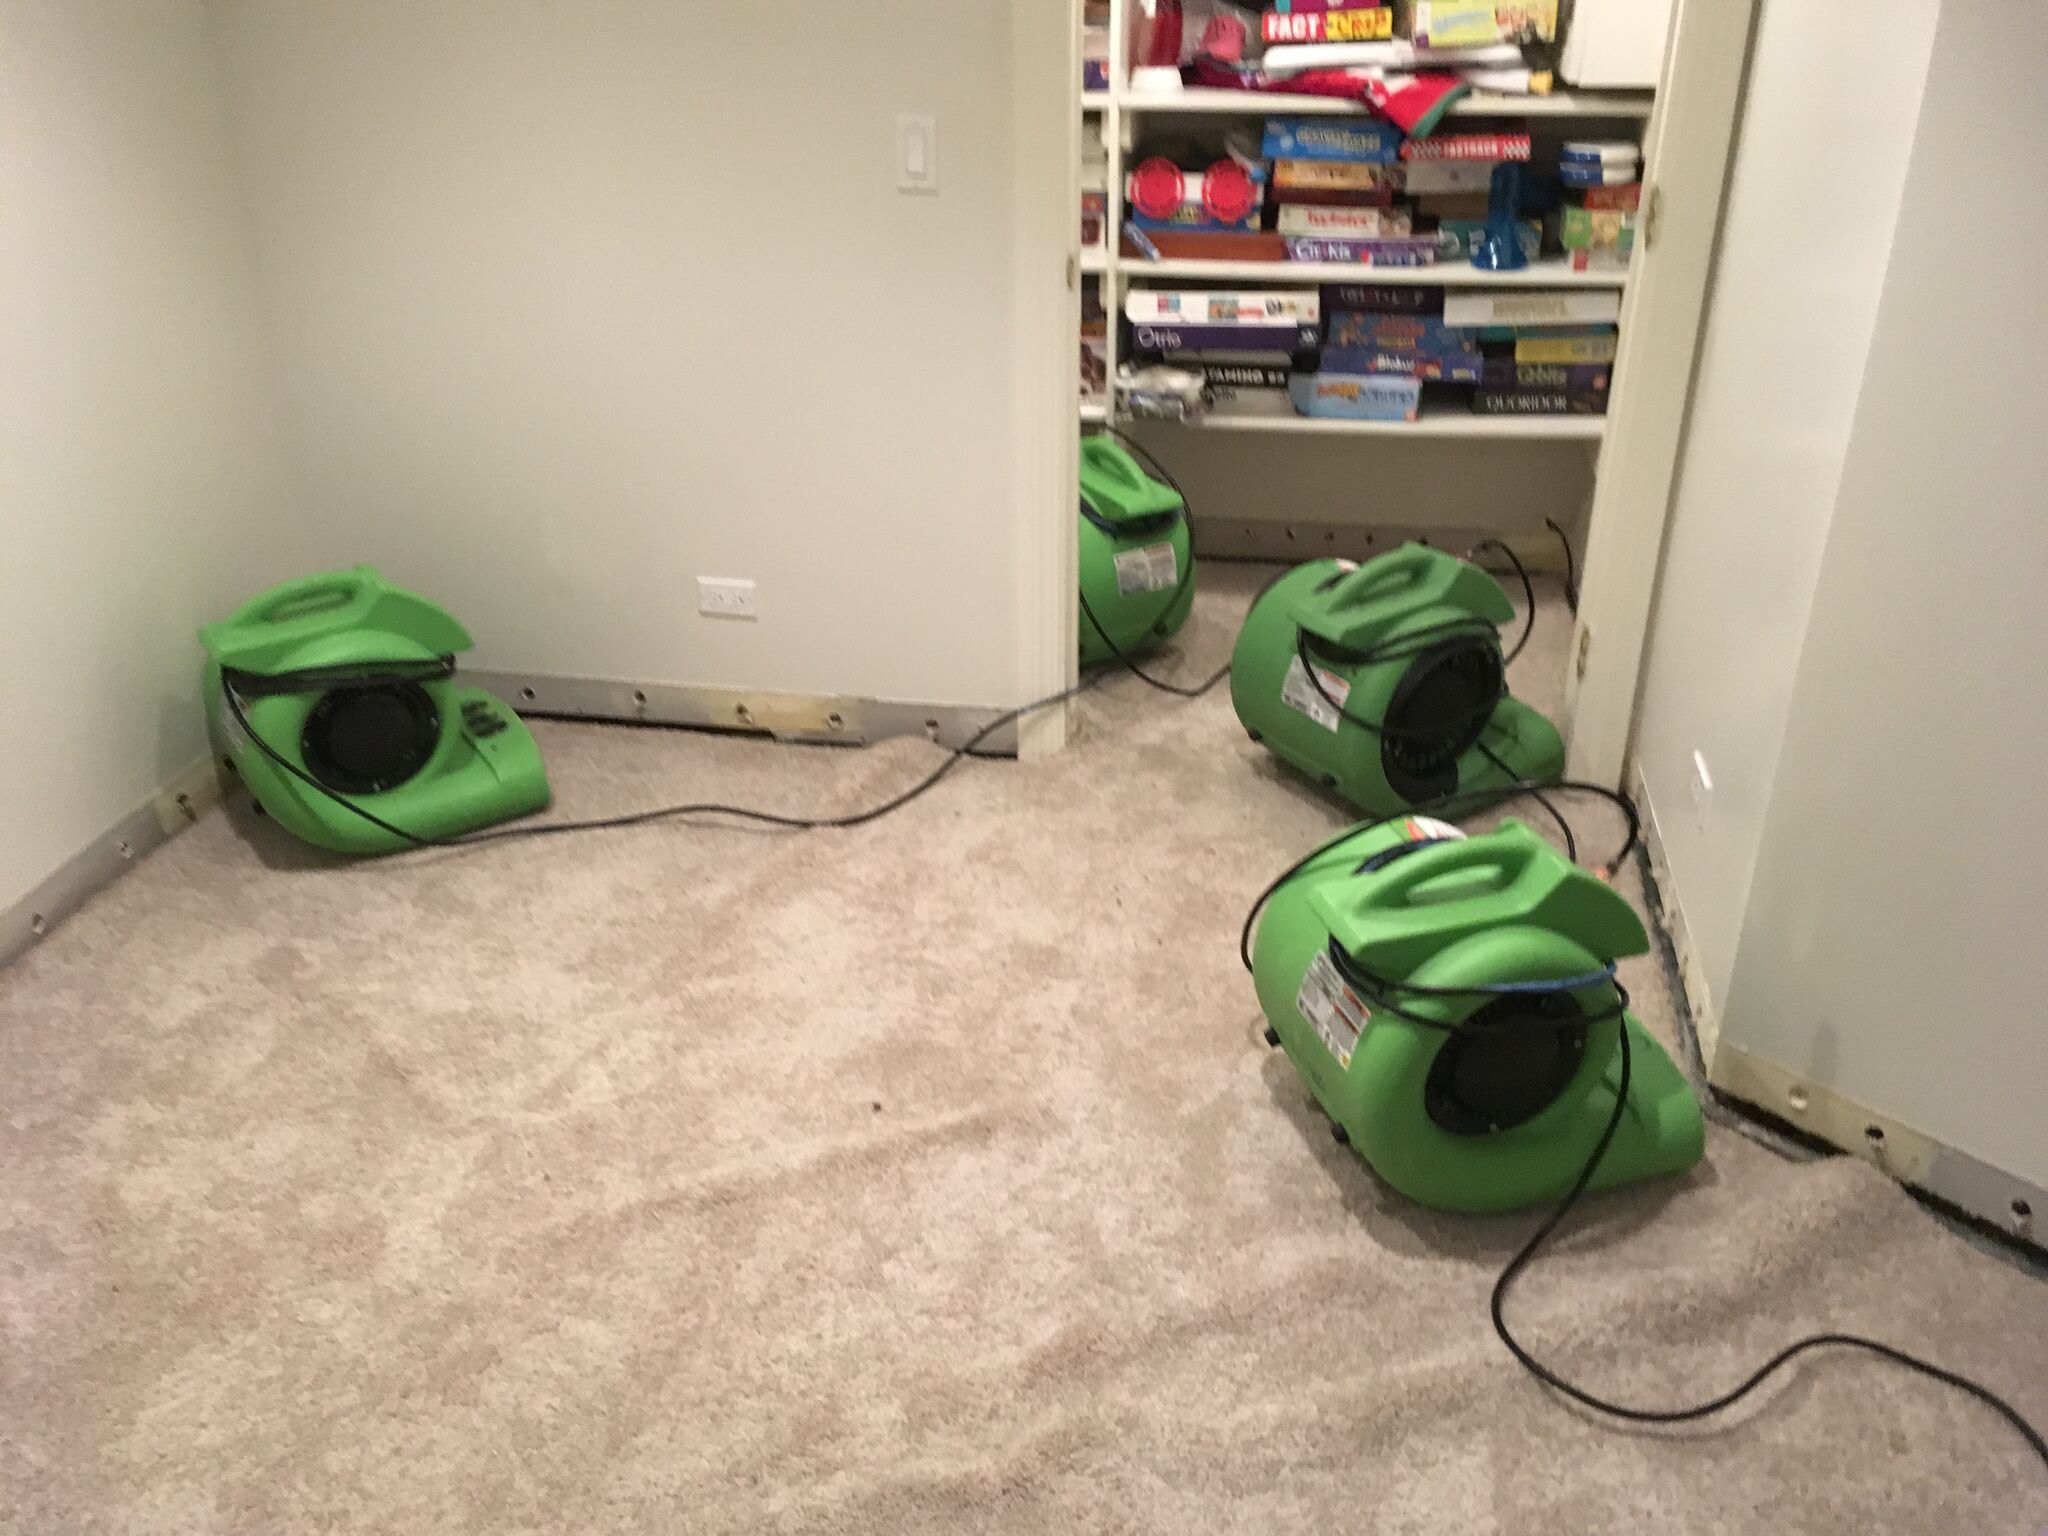 The SERVPRO equipment is up and running after a water loss in a local home.